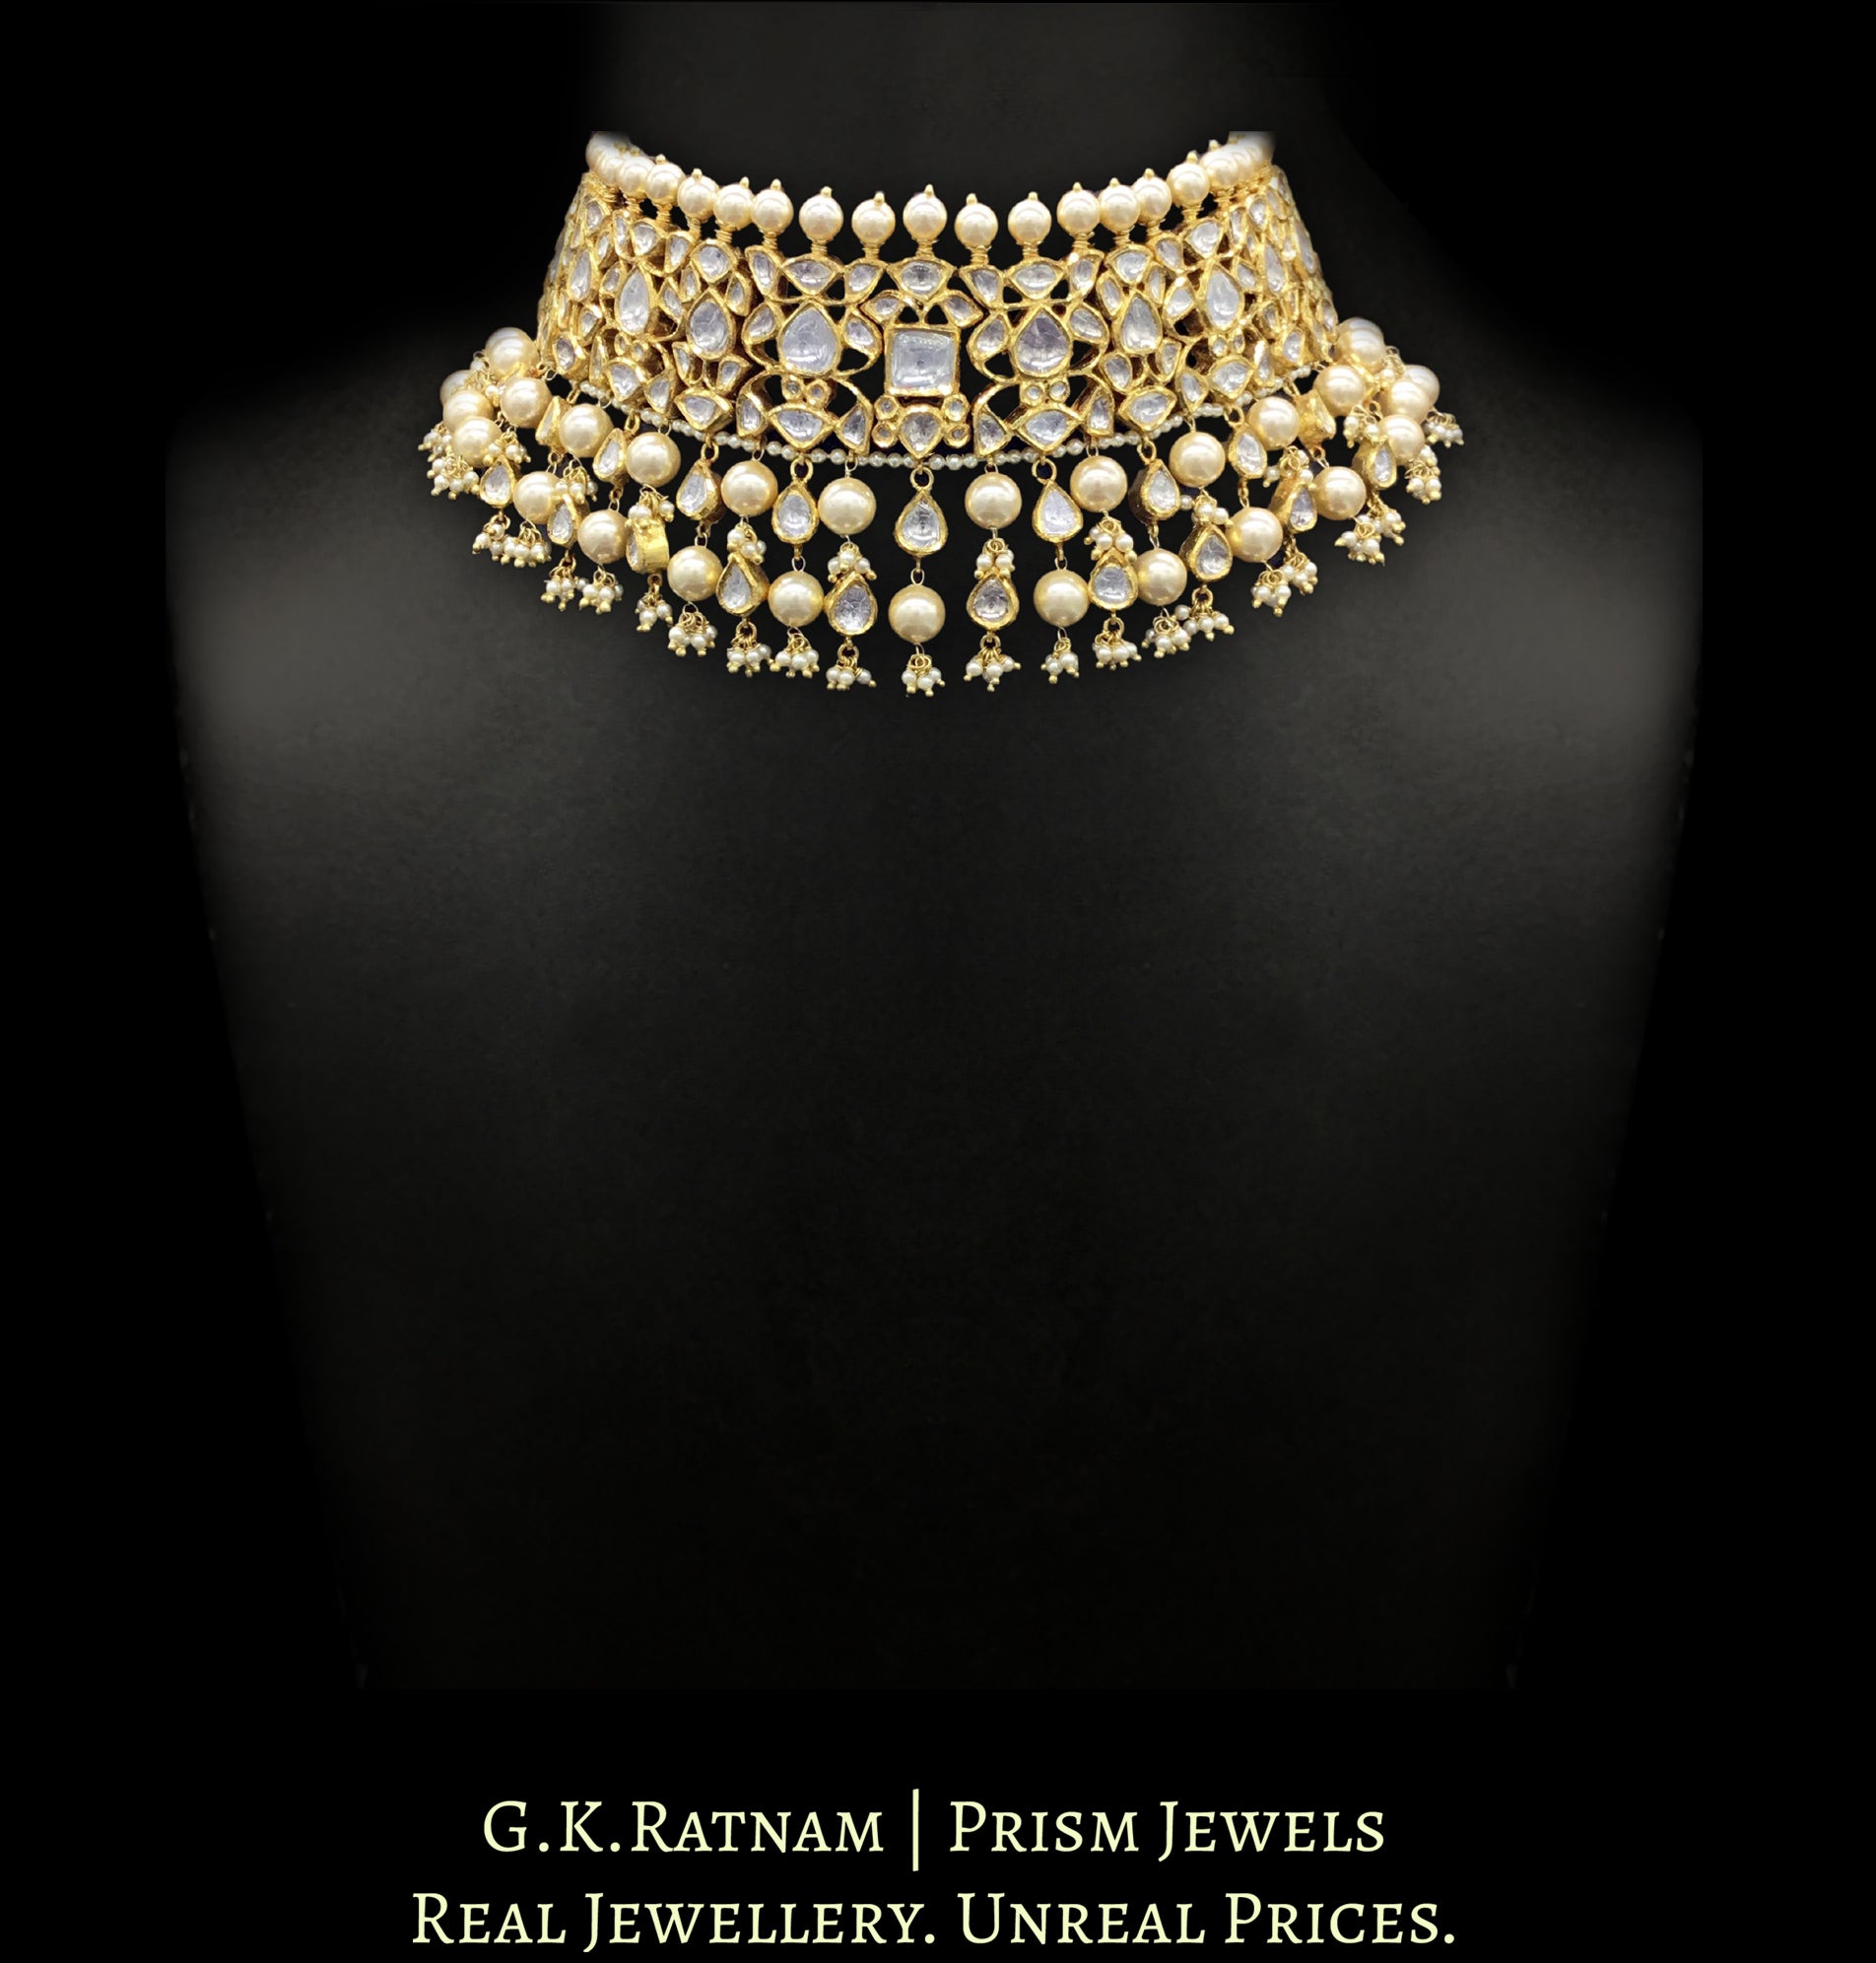 18k Gold and Diamond Polki Choker Necklace with shiny pearls alternating with uncut drops - G. K. Ratnam